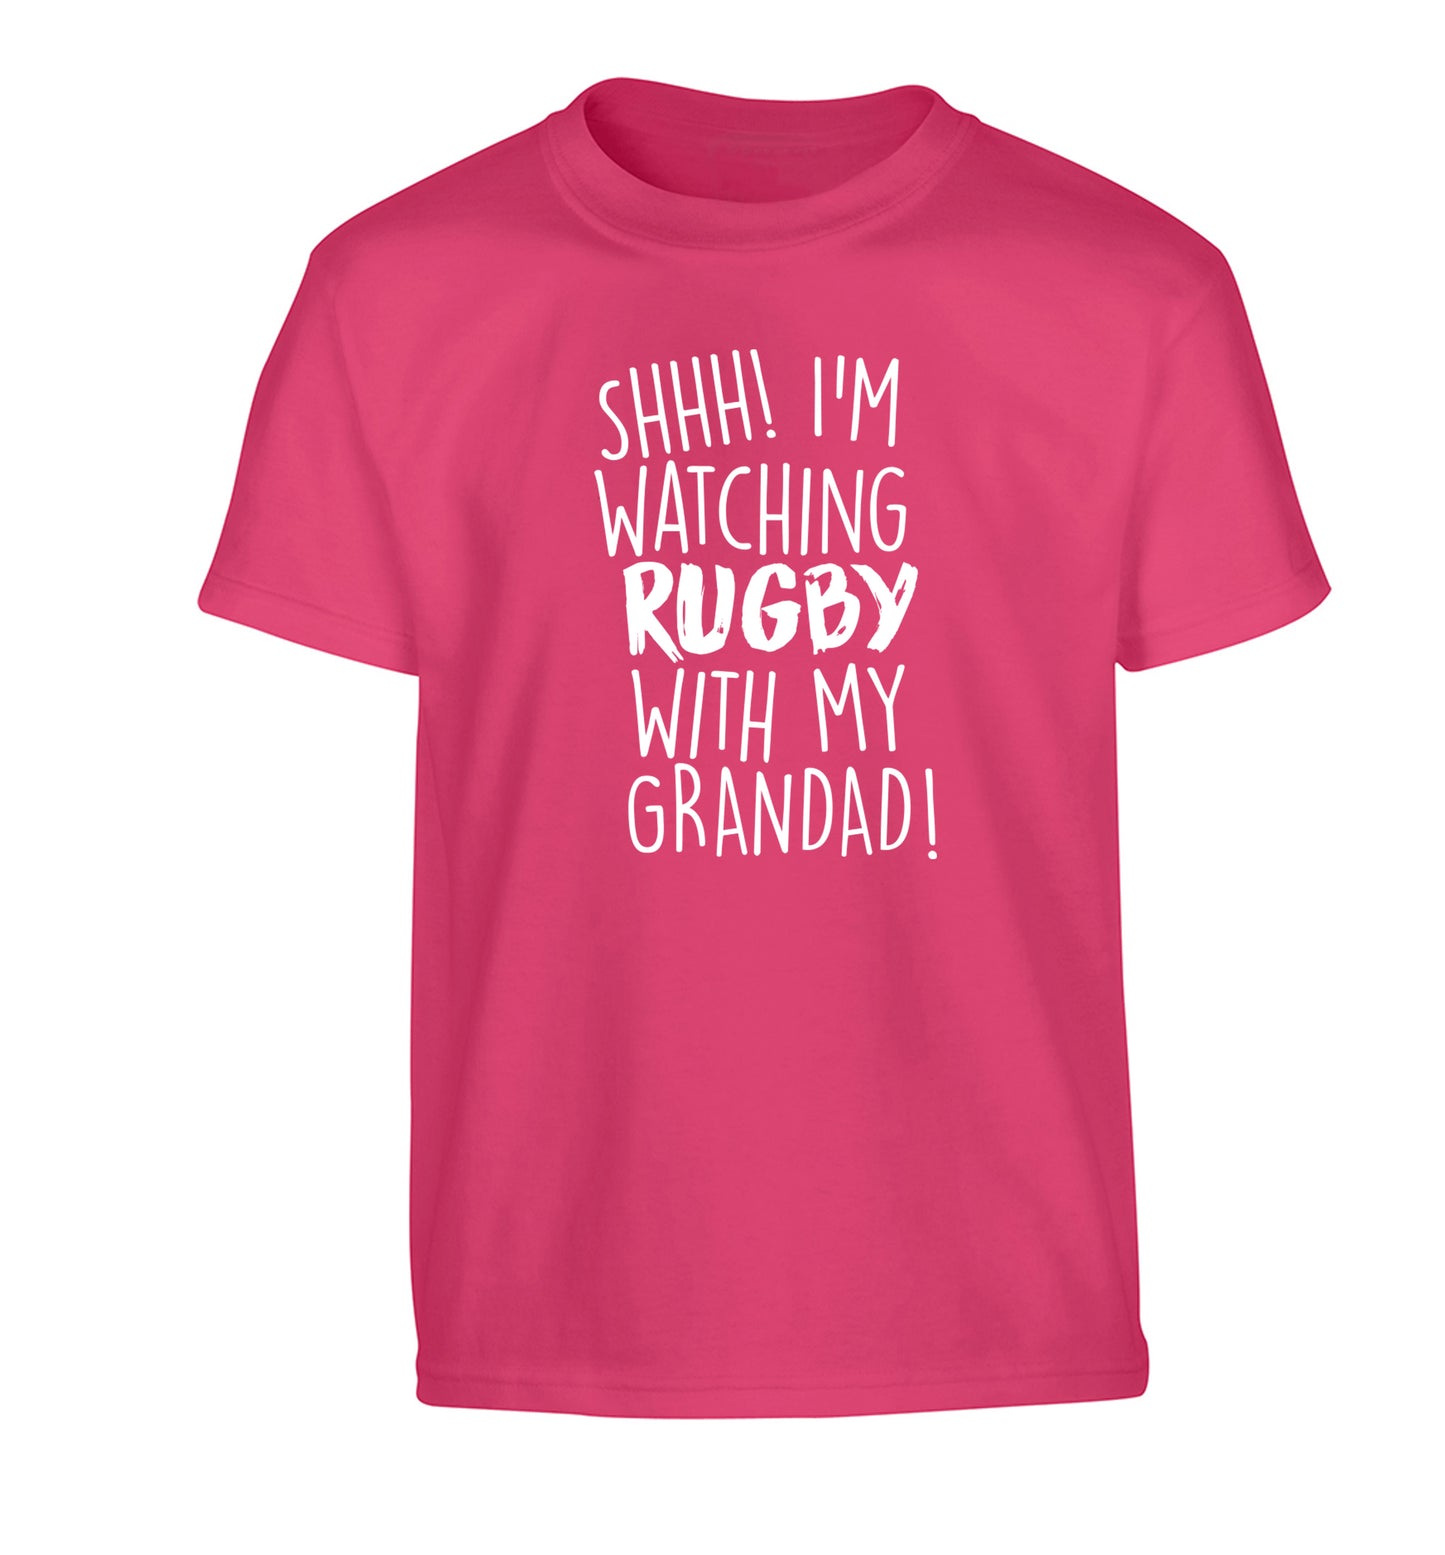 Shh I'm watching rugby with my grandad Children's pink Tshirt 12-13 Years